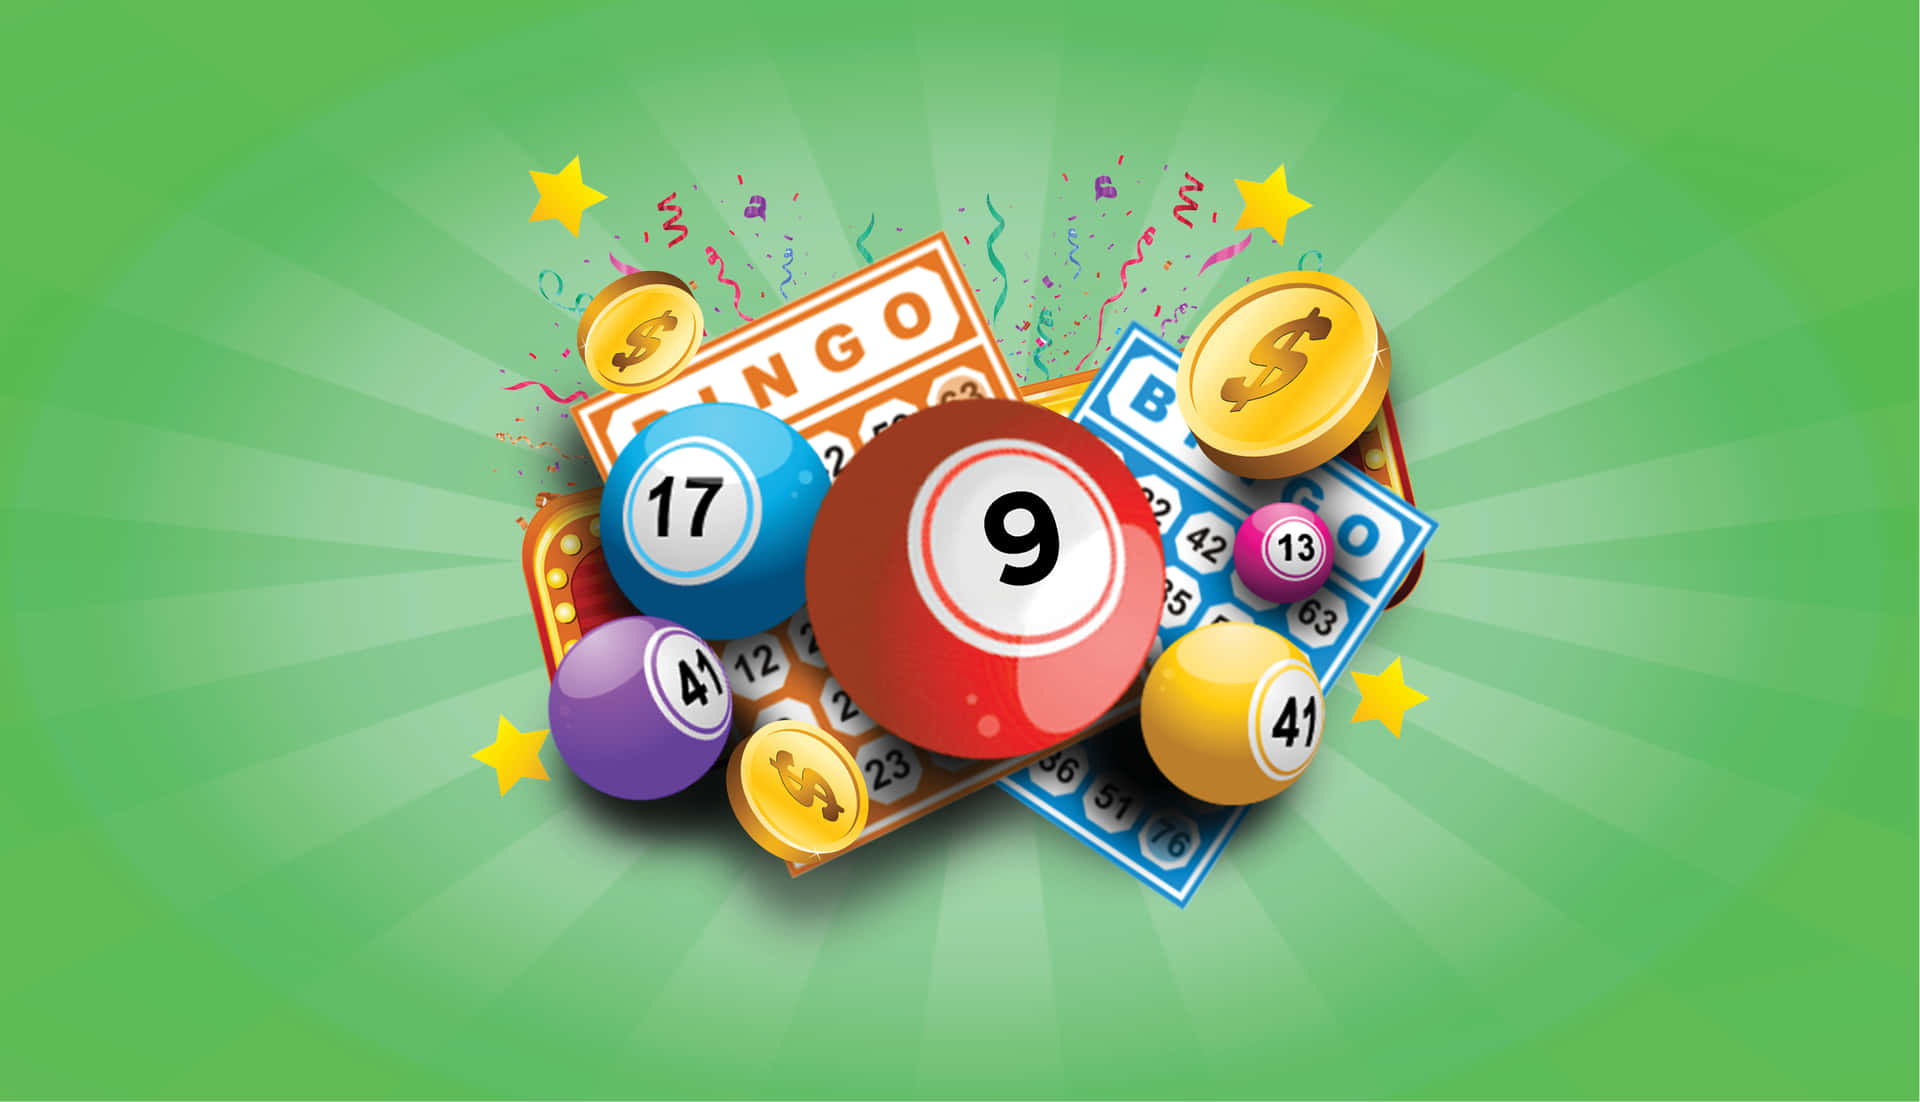 Bingo Balls And Coins On A Green Background